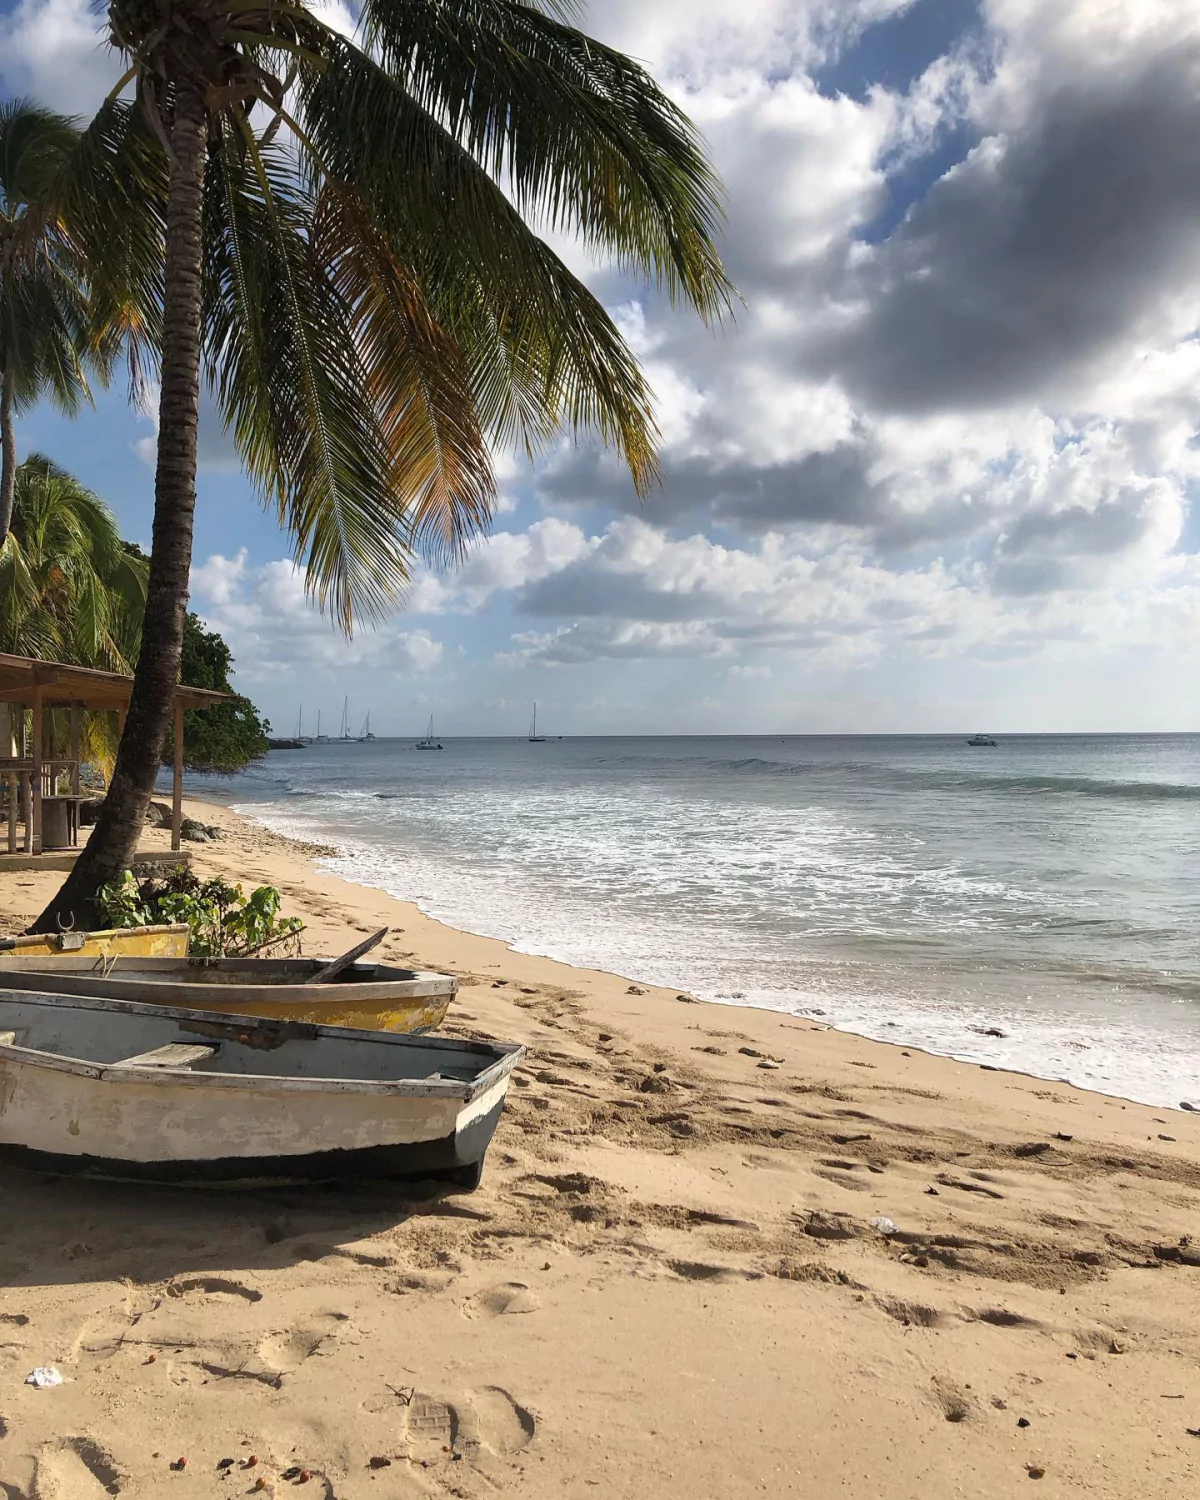 History and Heritage in Barbados